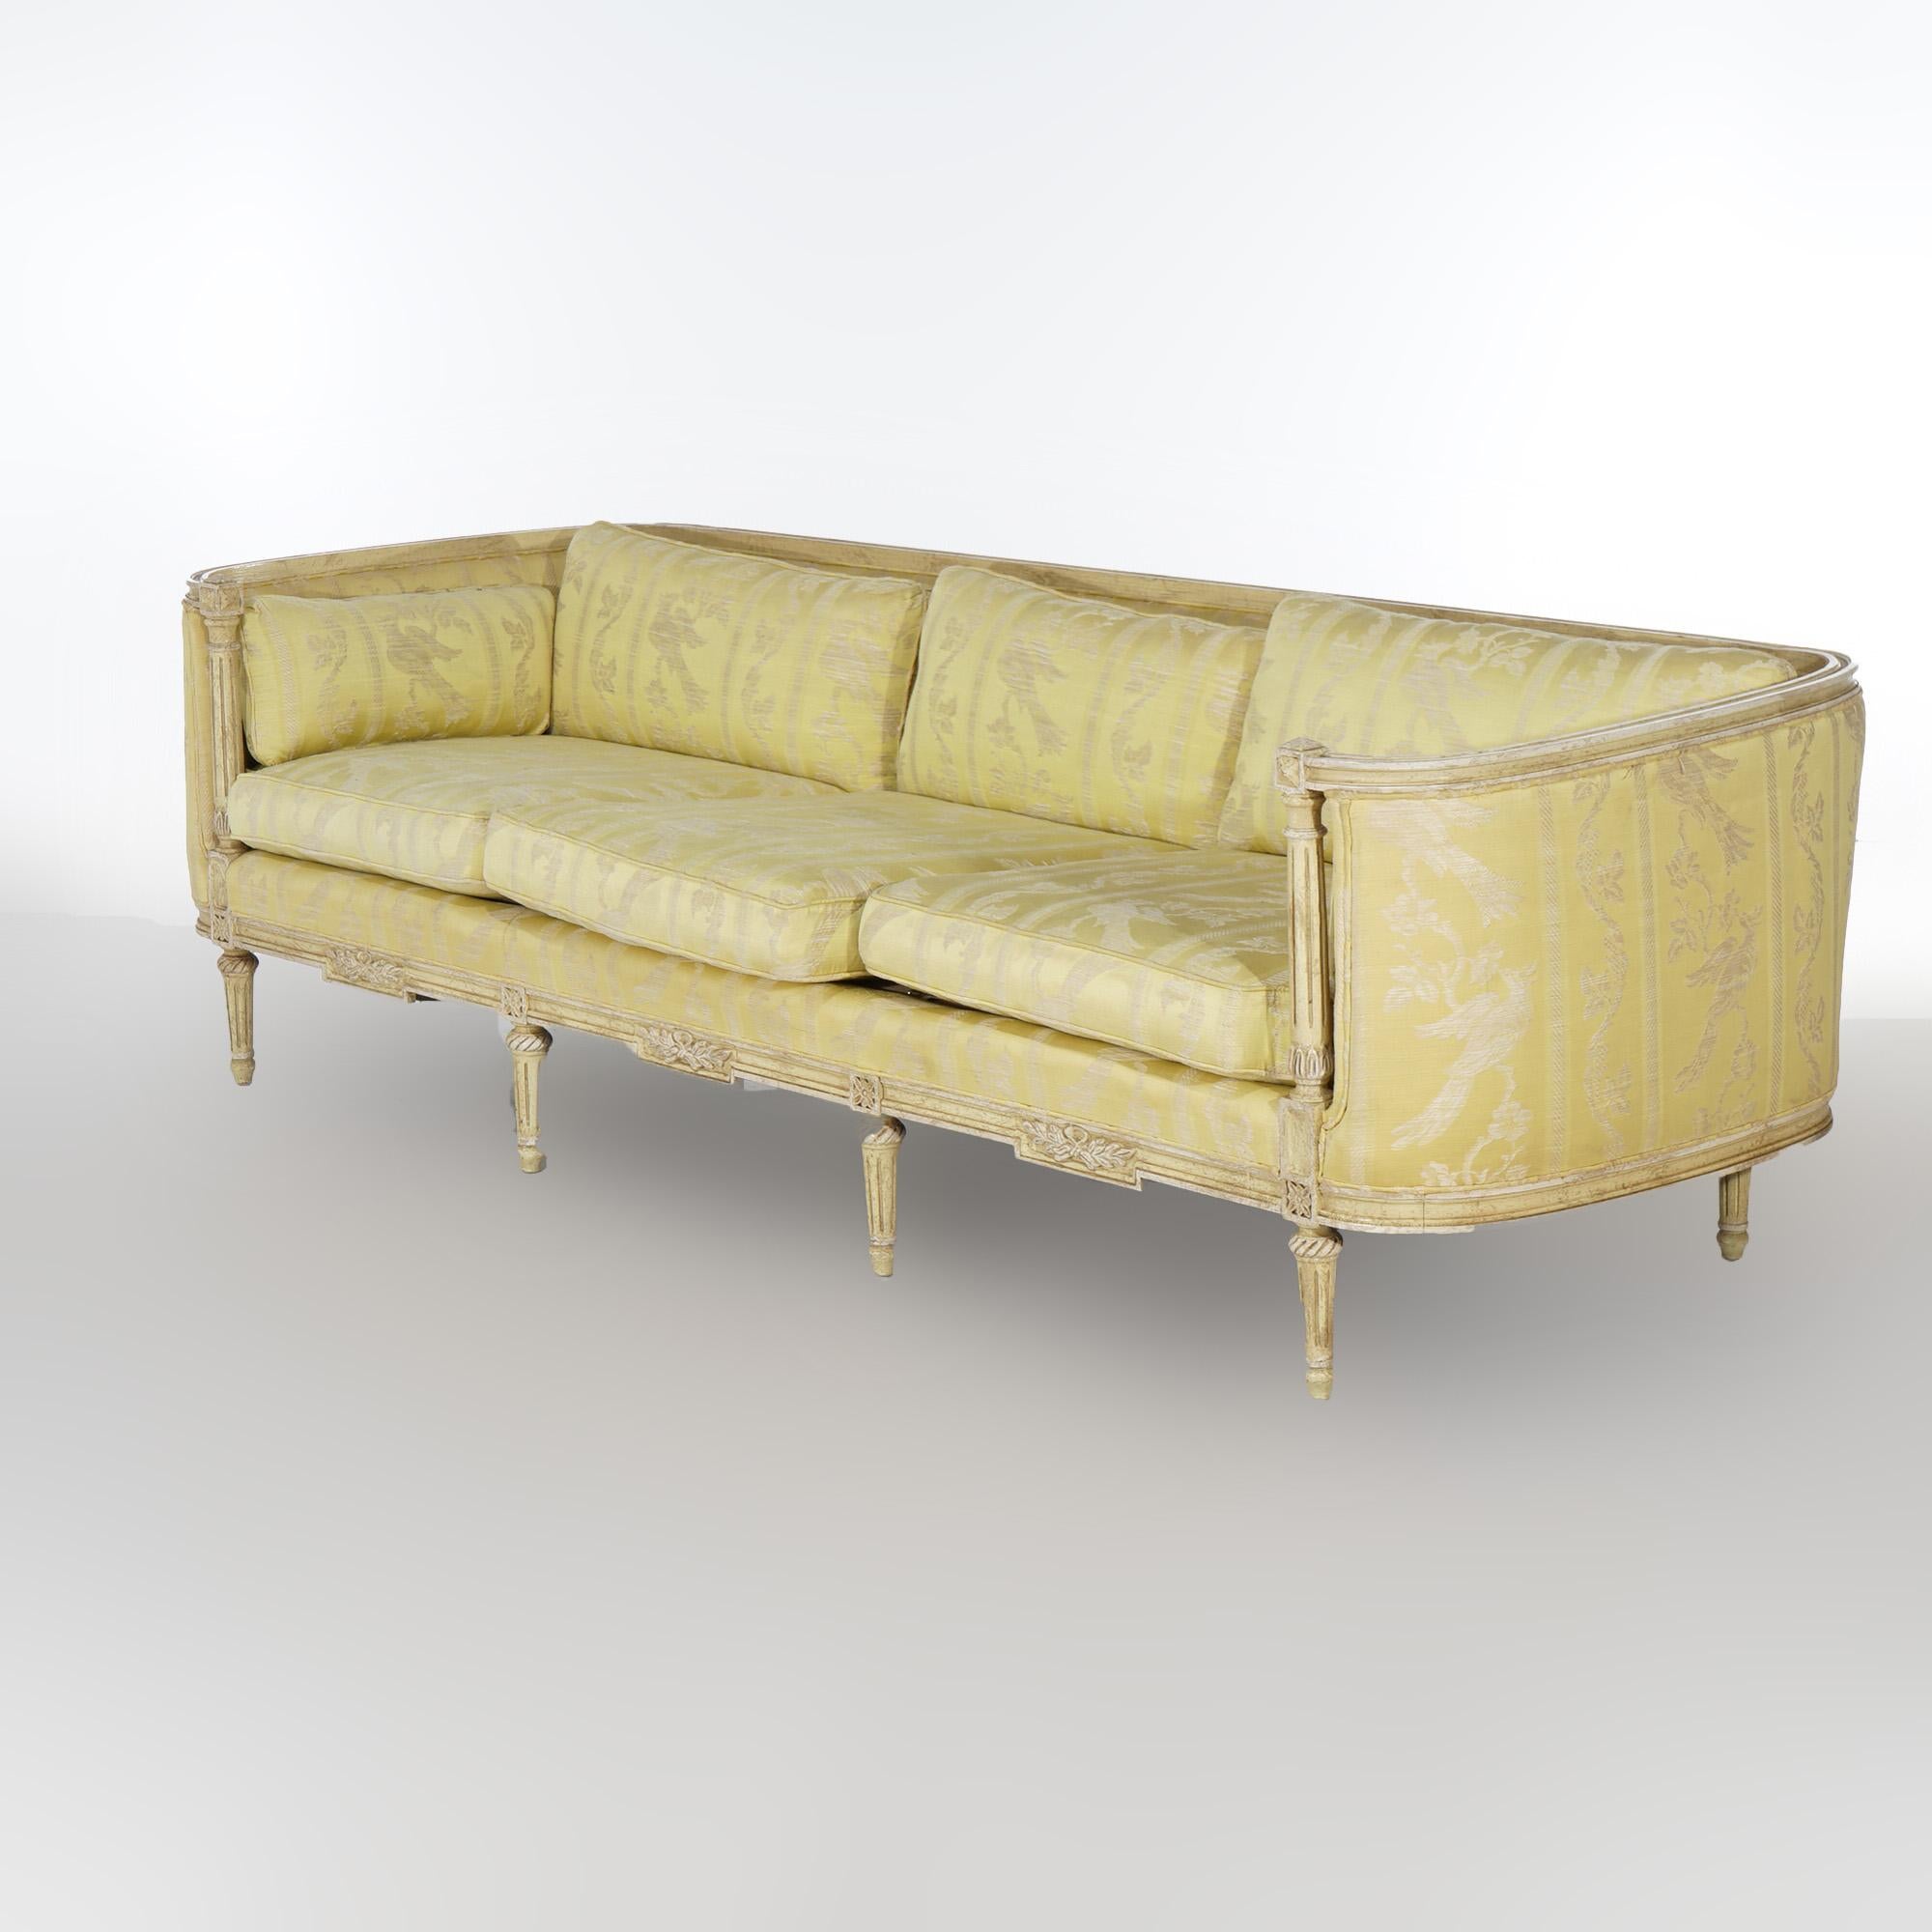 A French Louis XVI style sofa by Hibriten-Bernhardt offers wood frame in curved bergère form with upholstered upper having floral carved skirt and raised on tapered and reeded legs; maker label as photographed; 20th century

Measures - 27.5